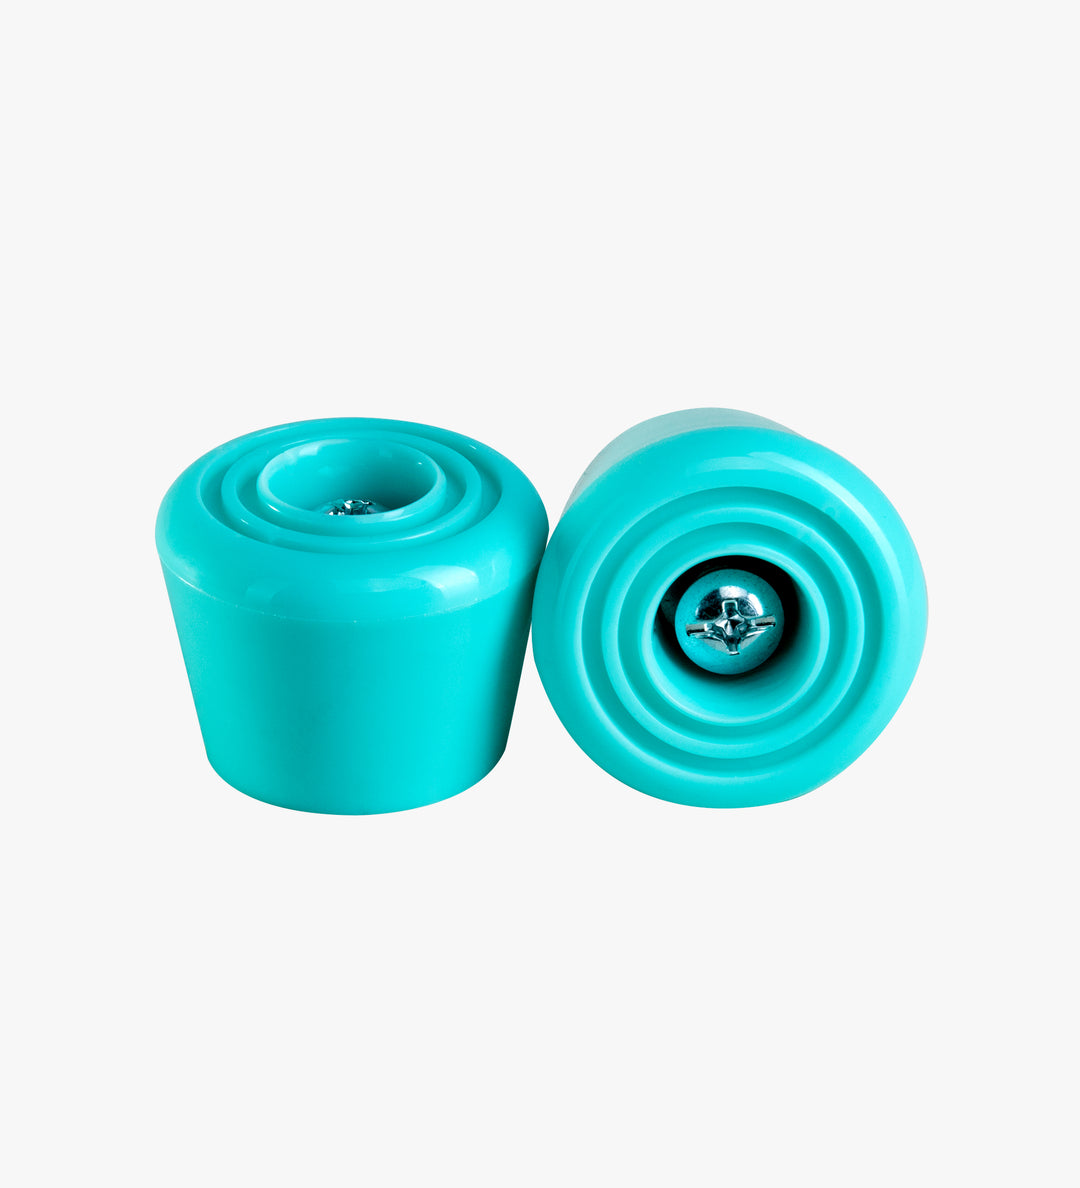 C7skates Teal roller skate stoppers made from durable polyurethane PU82A dimensions and measure 47 by 35 mm. 